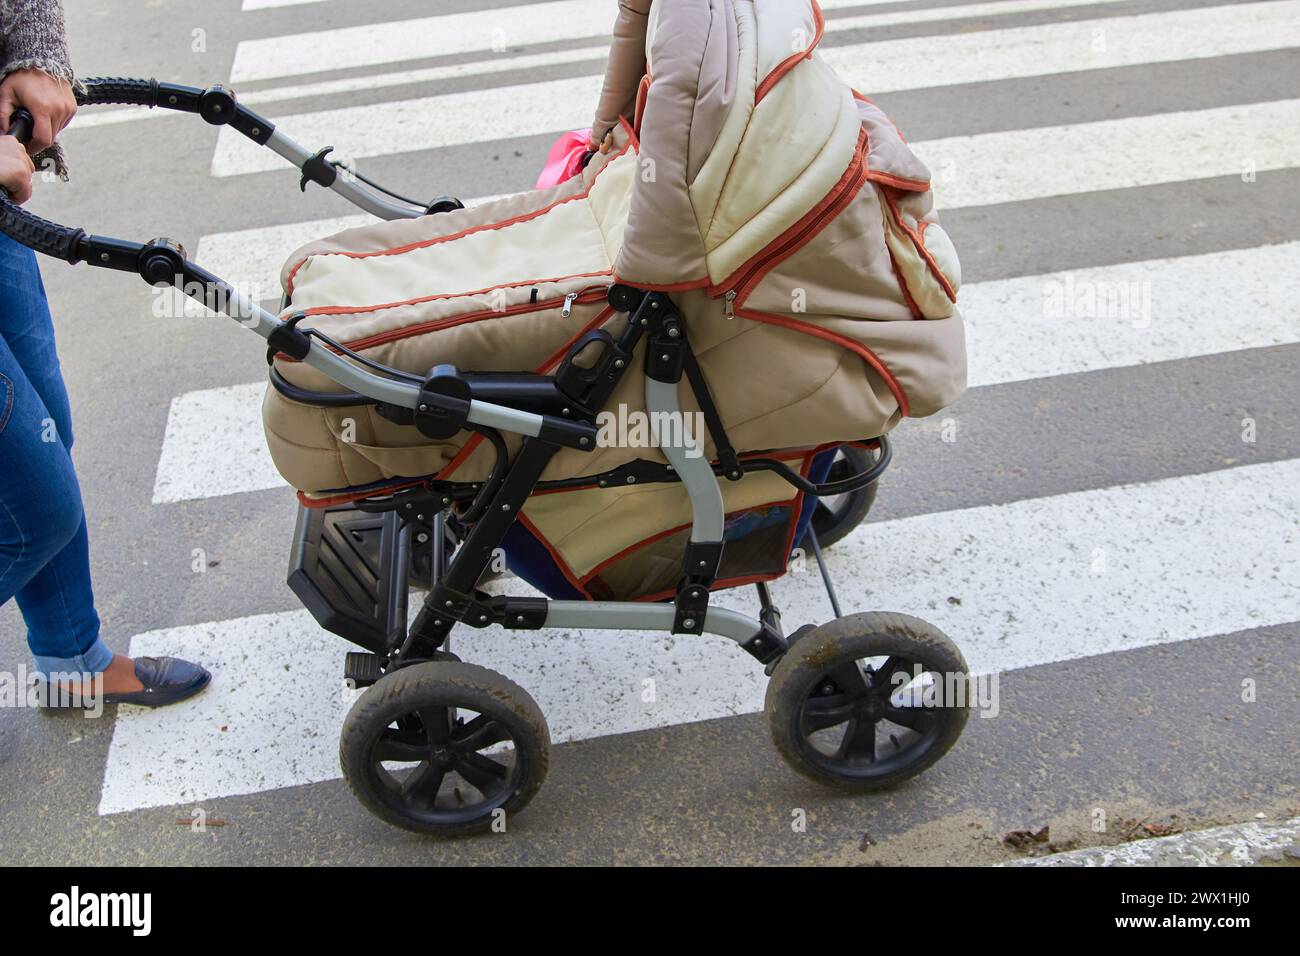 woman on the street pushes an old stroller on the road Stock Photo